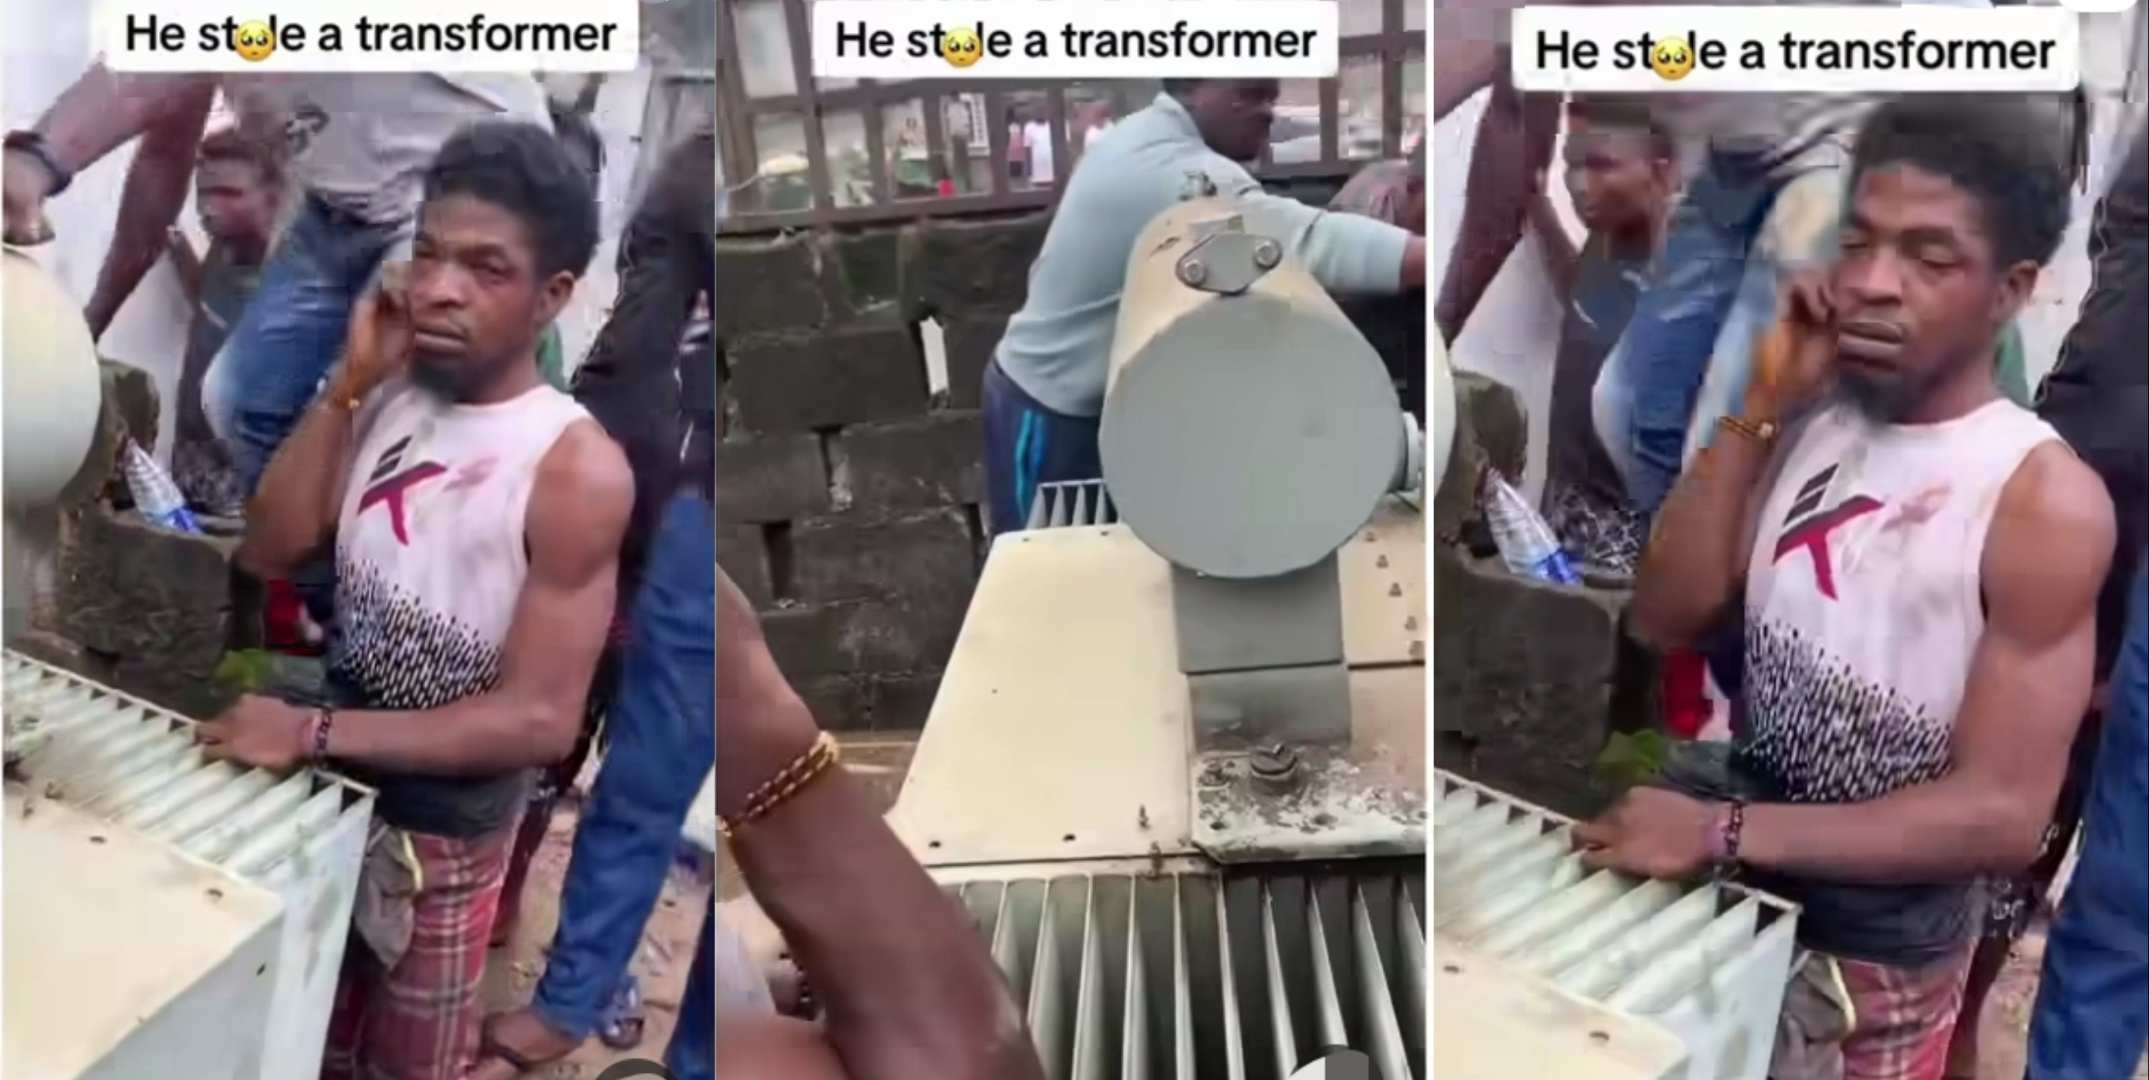 Man nabbed after he singlehandedly stole community transformer